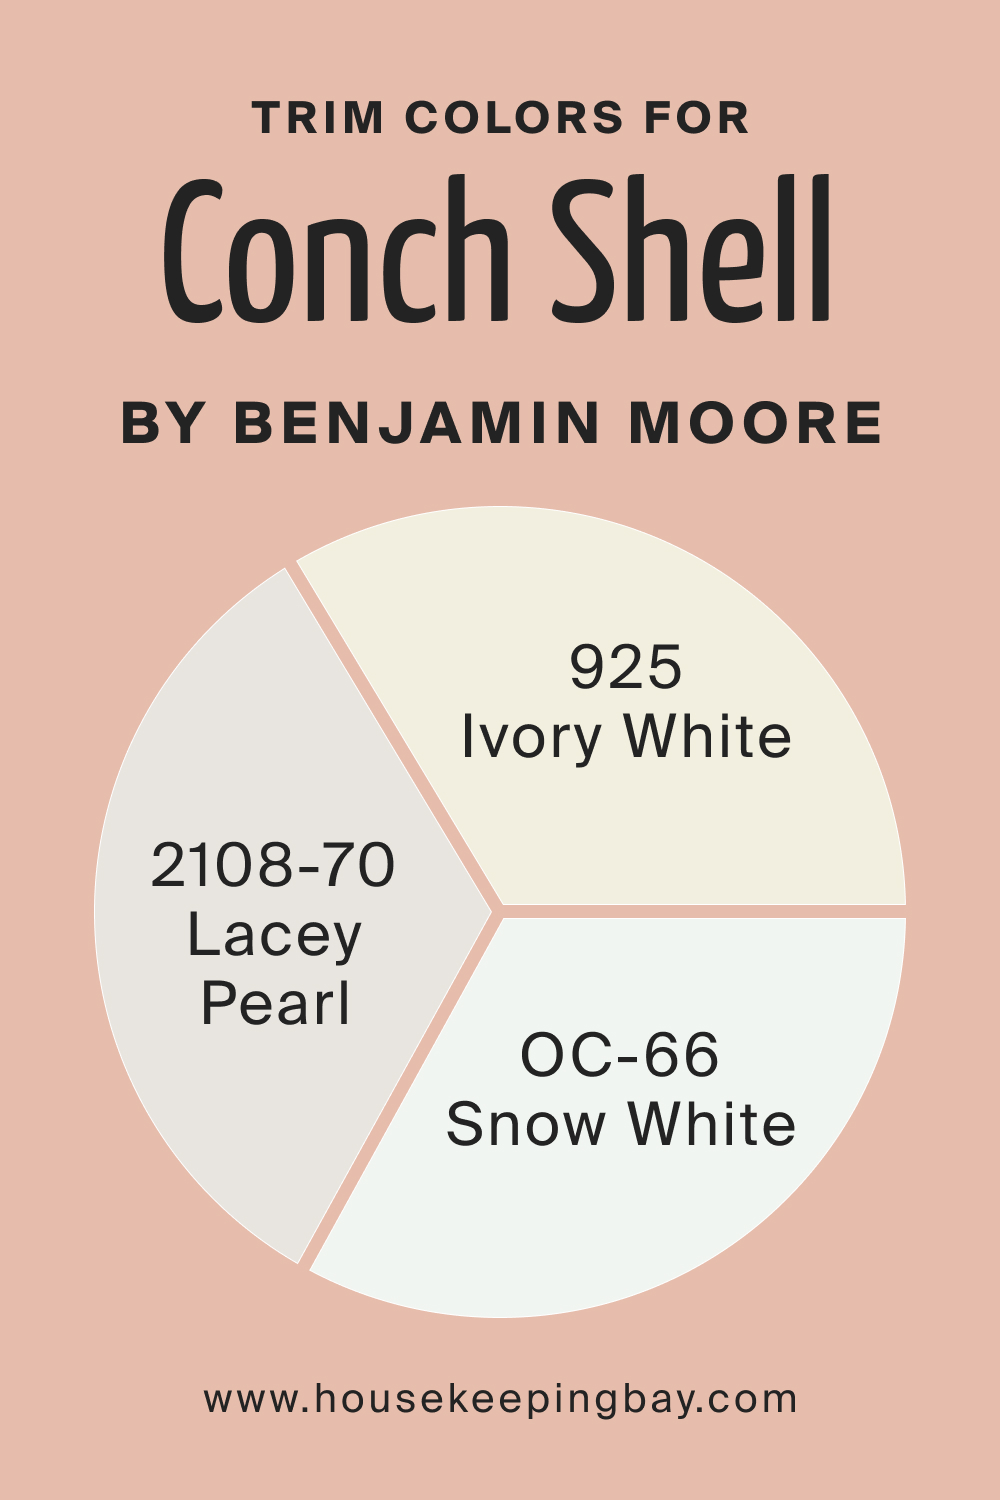 Trim Colors for Conch Shell 052 by Benjamin Moore, www. Housekeepingbay.com